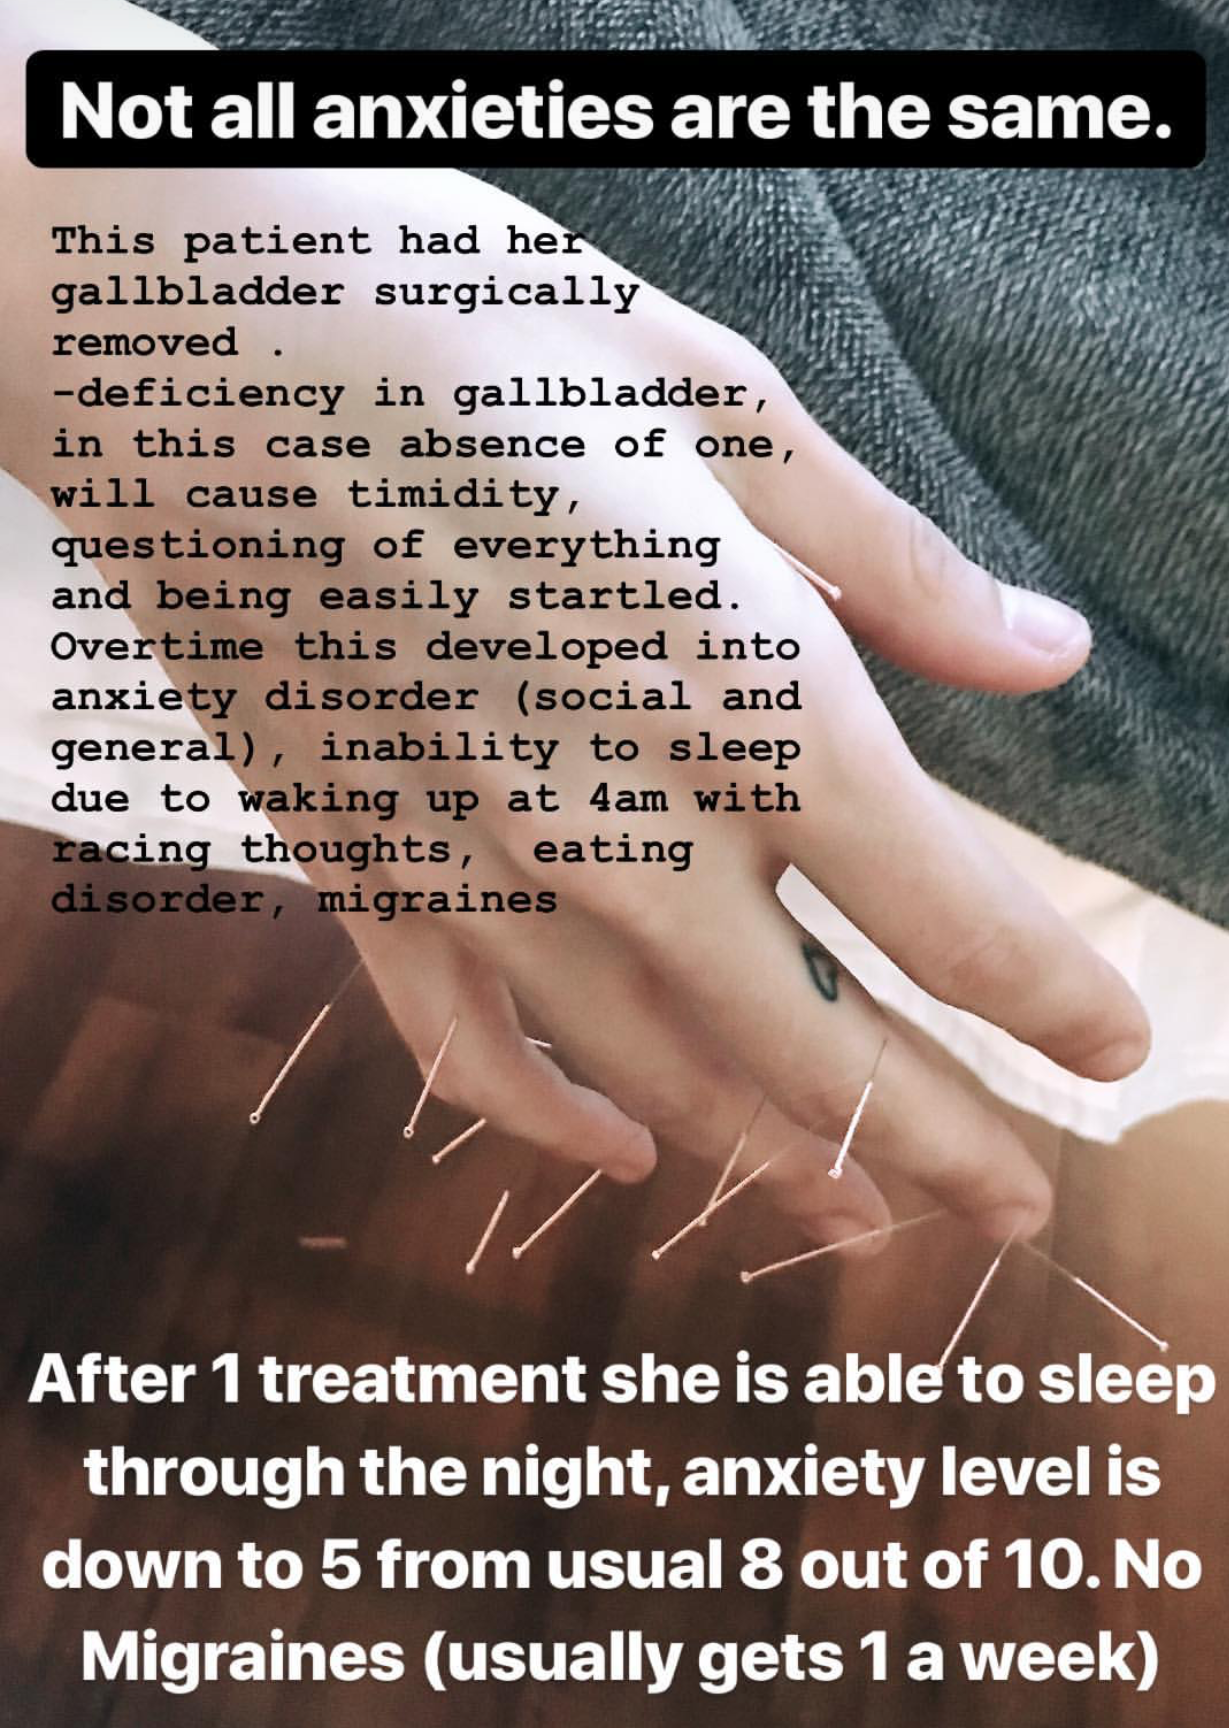  SuJok acupuncture in Vancouver used for treating mental health. Patient received treatment after having her gallbladder removed and experiencing anxiety due to it. Treatment resulted in improvement of sleeping schedules and reducing anxiety.  